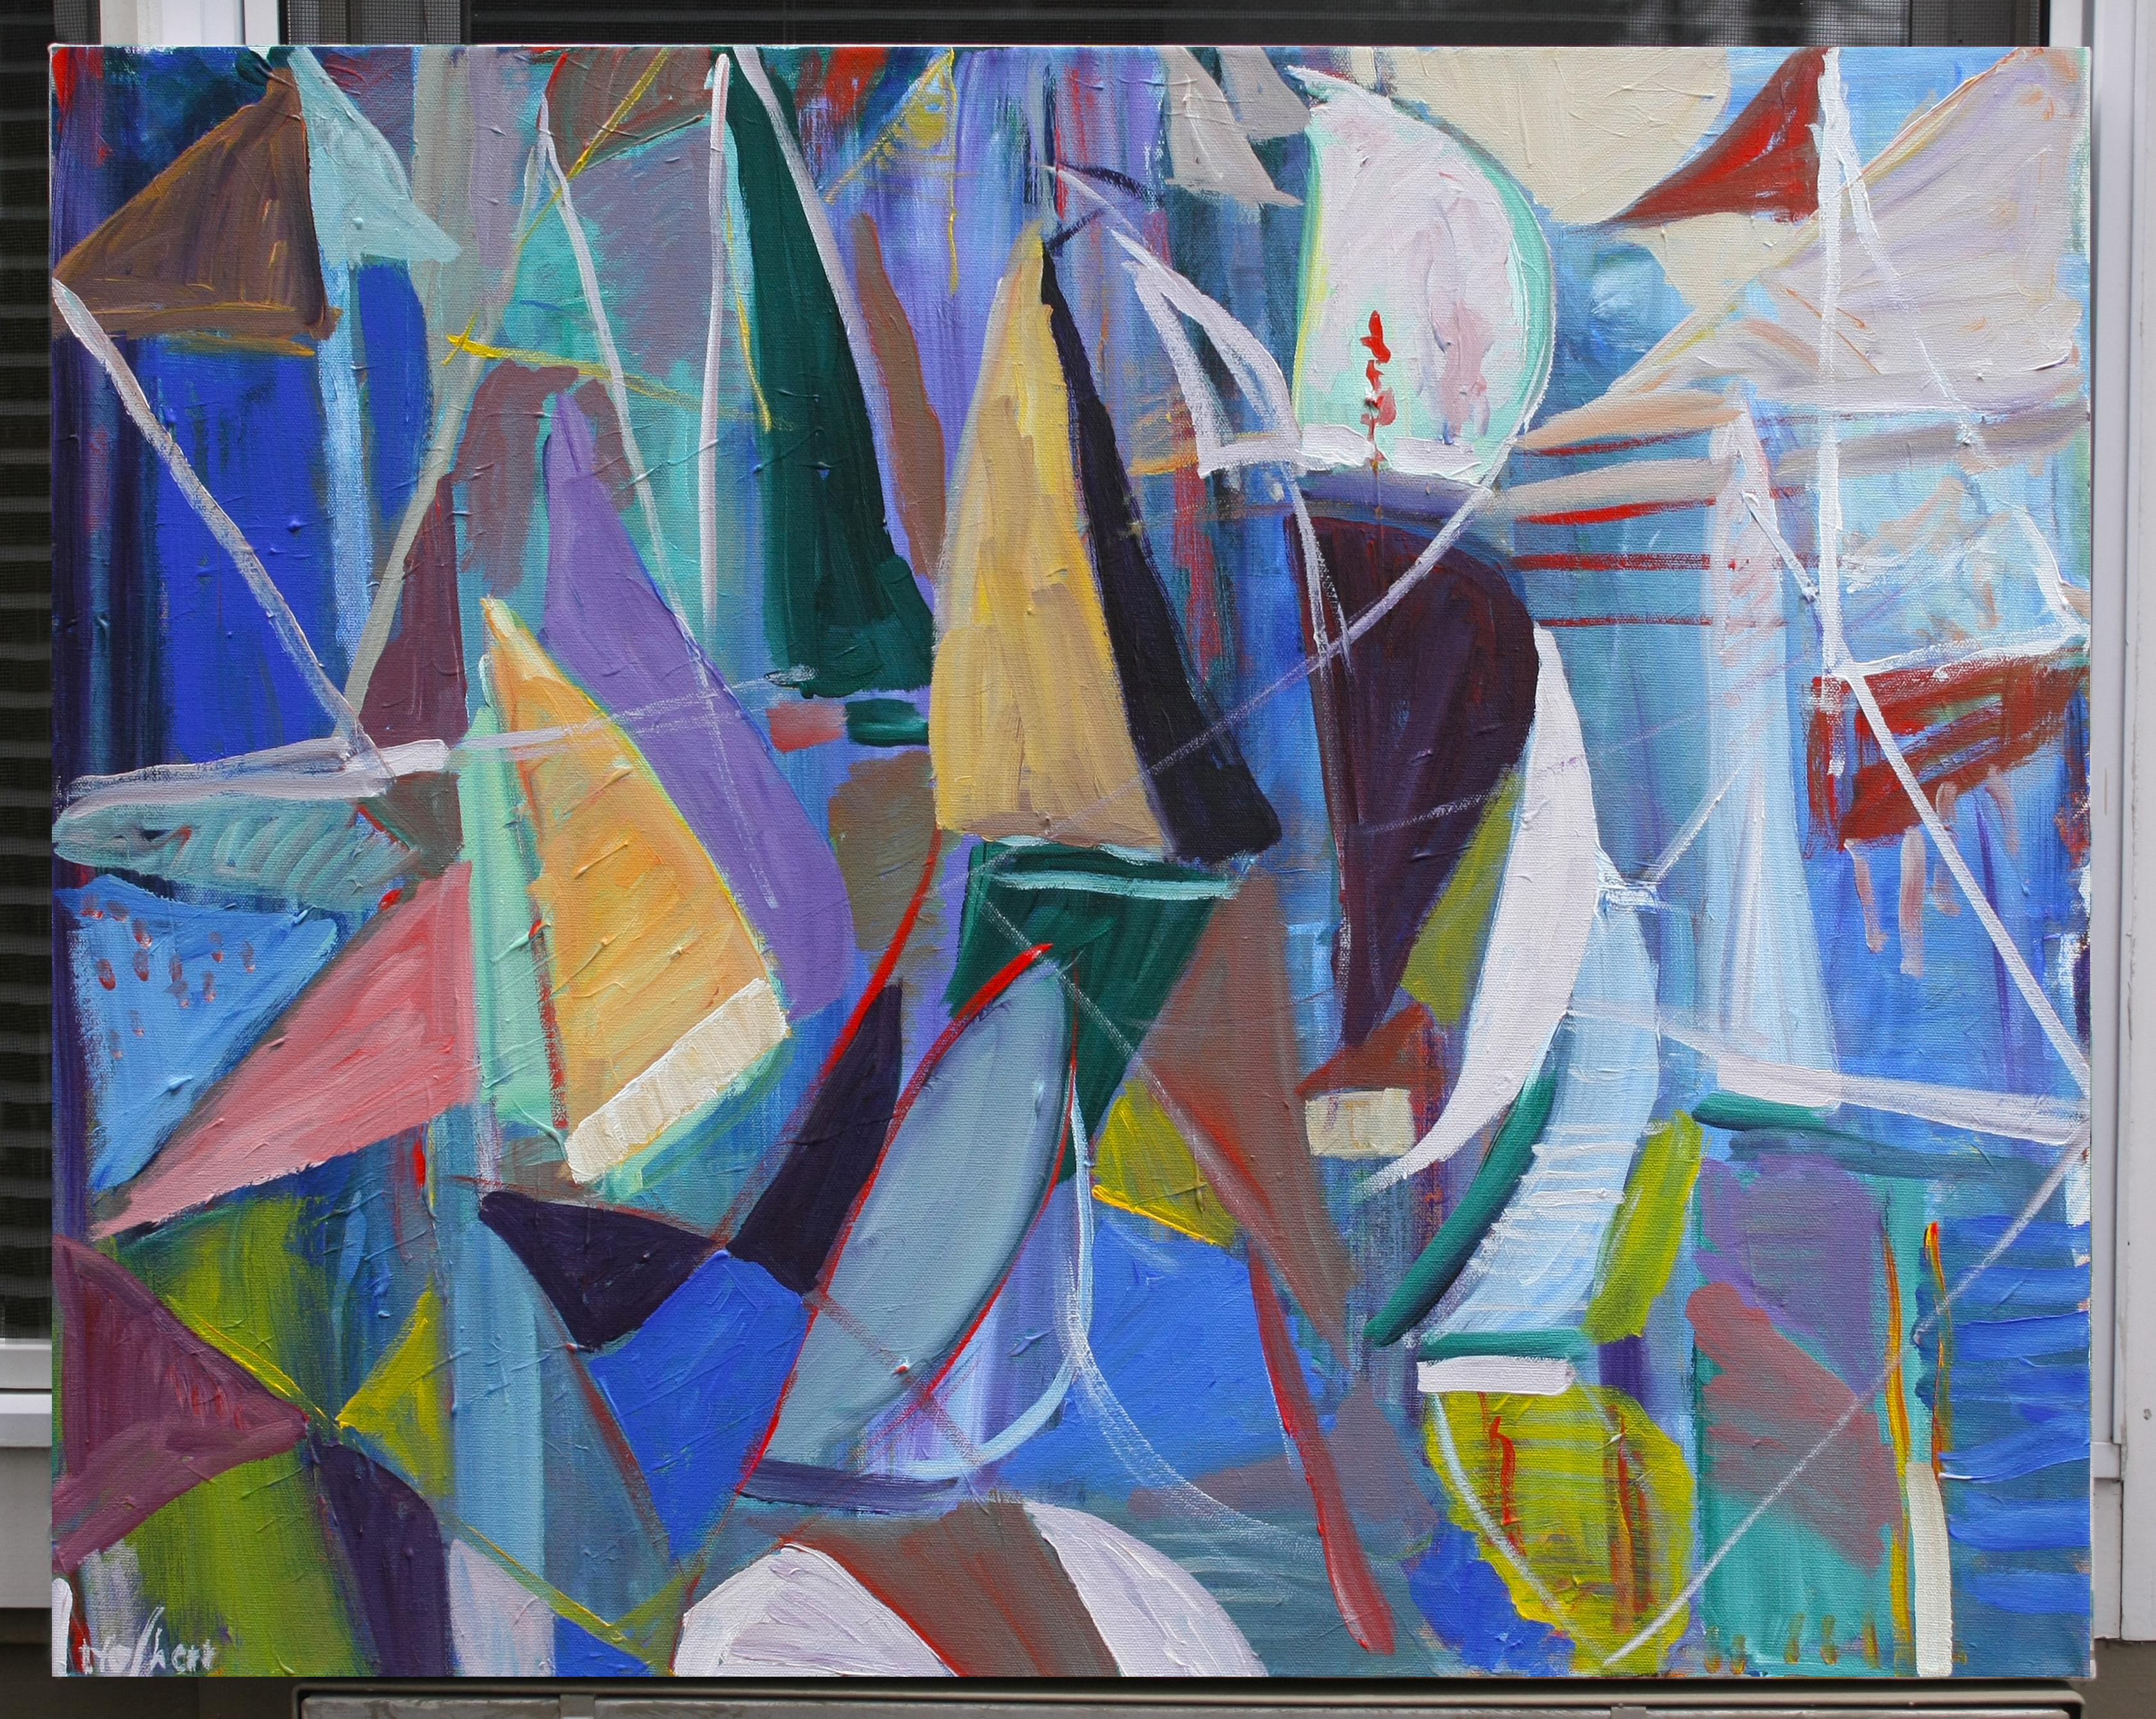 <p>Artist Comments<br>An array of colorful sailboats populate the scene. Their triangular shape serves as a visual motif, repeated and modified throughout to move away from strict representation. Bold and vivid colors complement the expressive paint